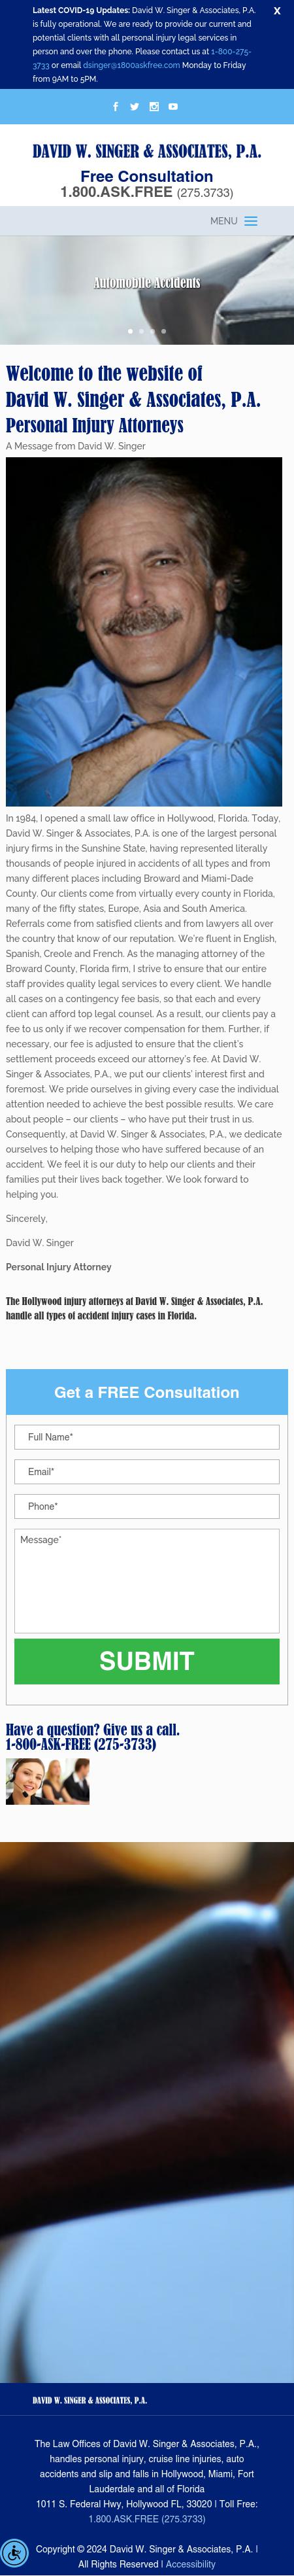 Law Offices of David W. Singer & Associates, P.A. - Hollywood FL Lawyers